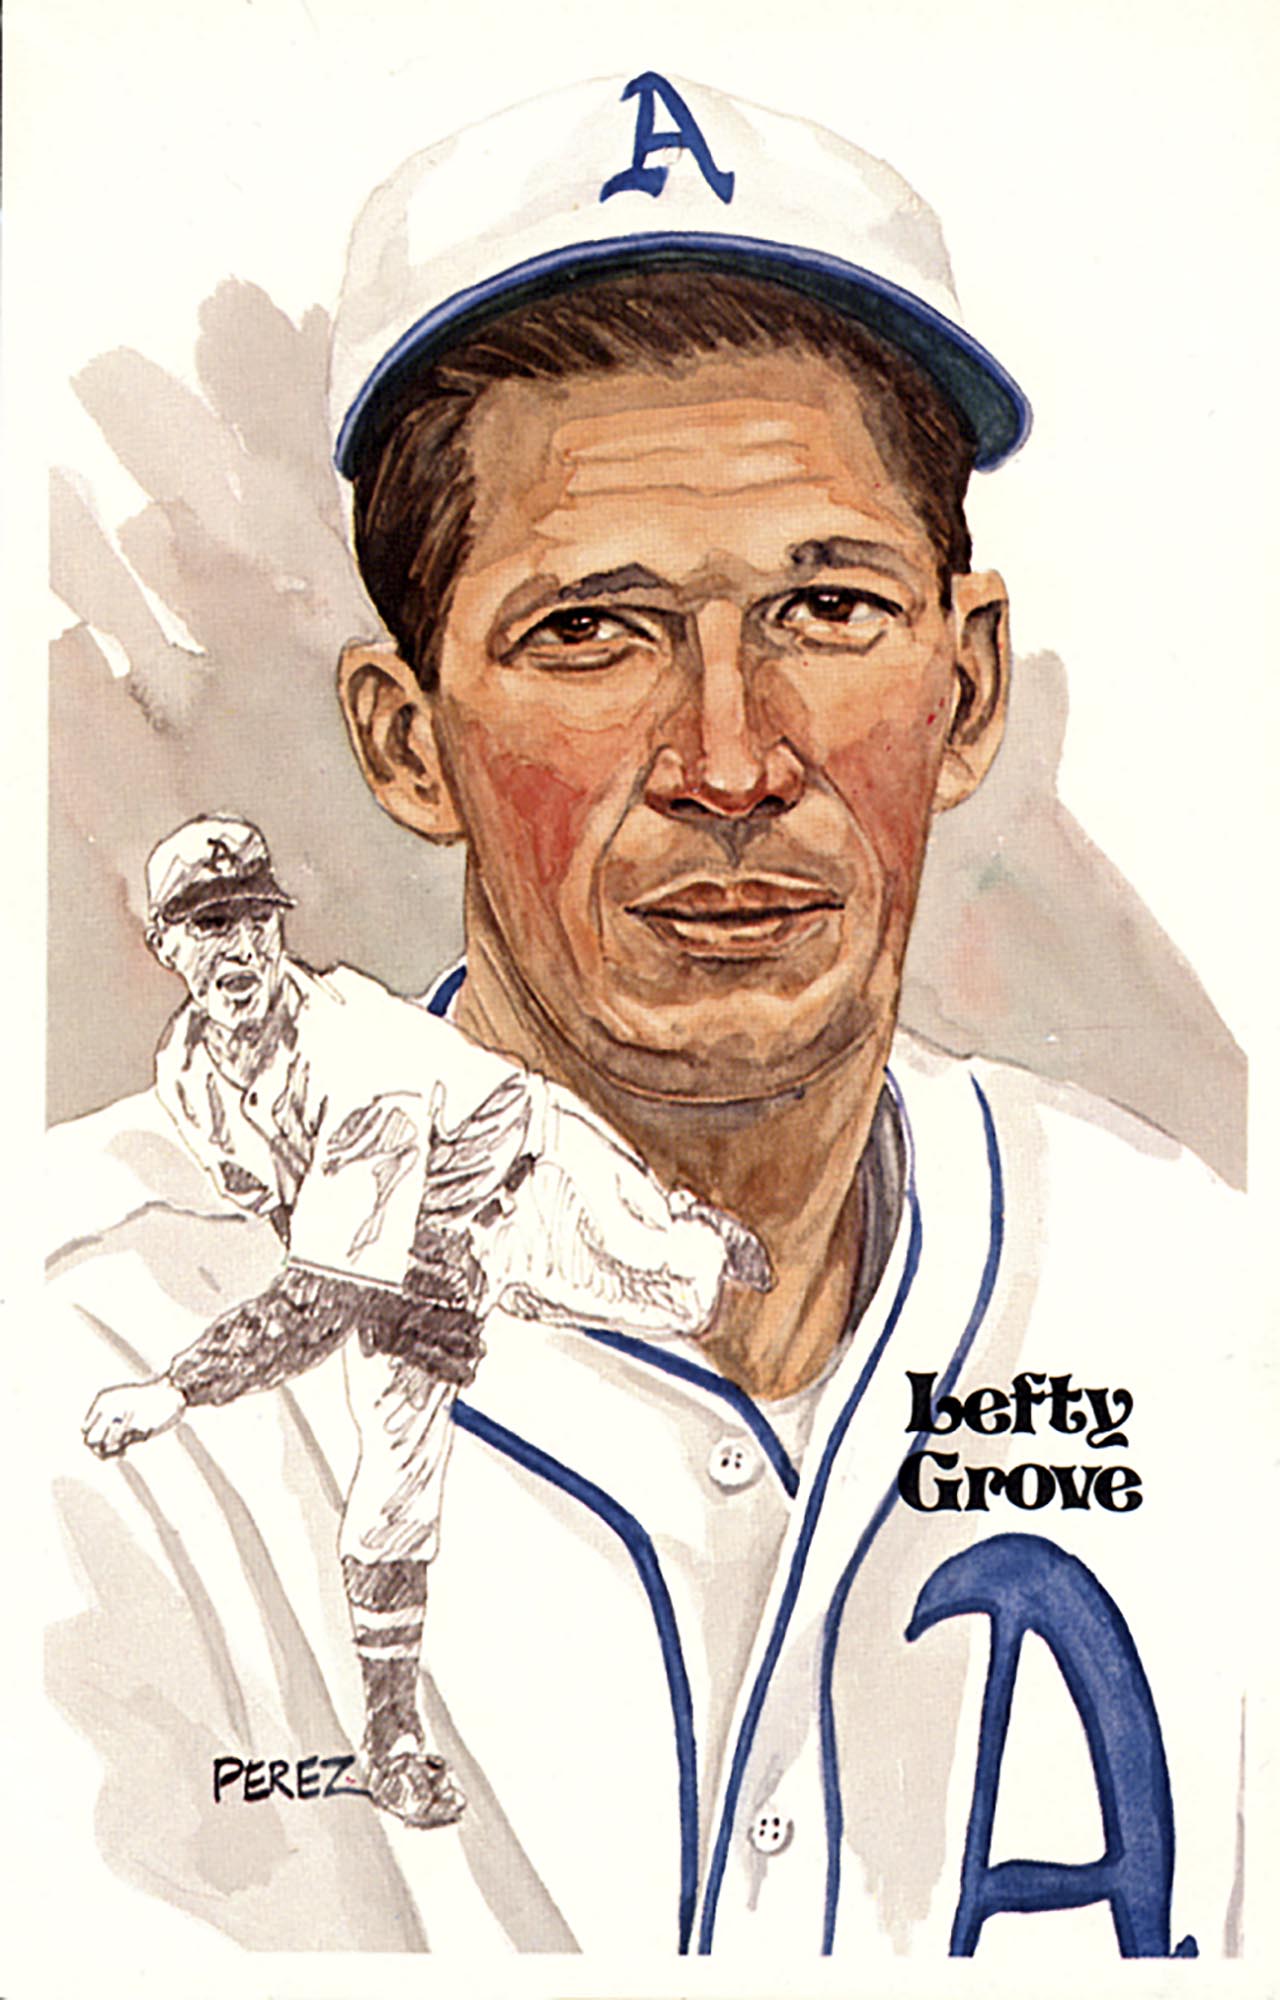 Hall of Fame Art Post Cards Series 2 : Dick Perez1280 x 2000